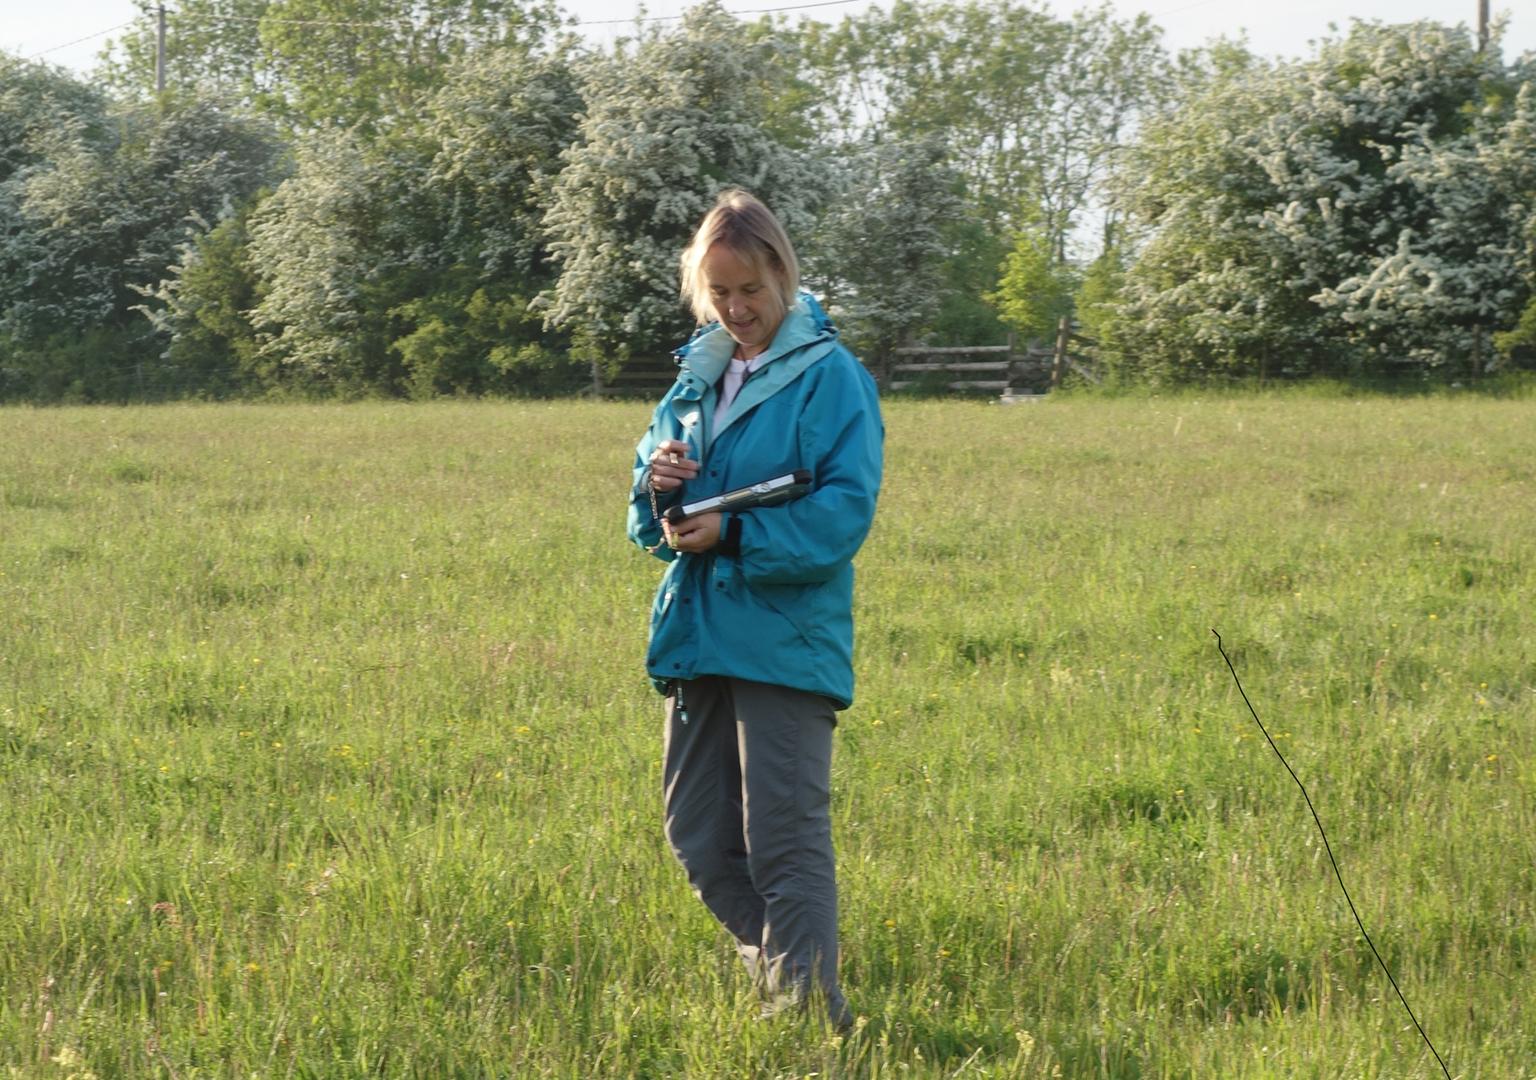 Surveying vegetation in a field